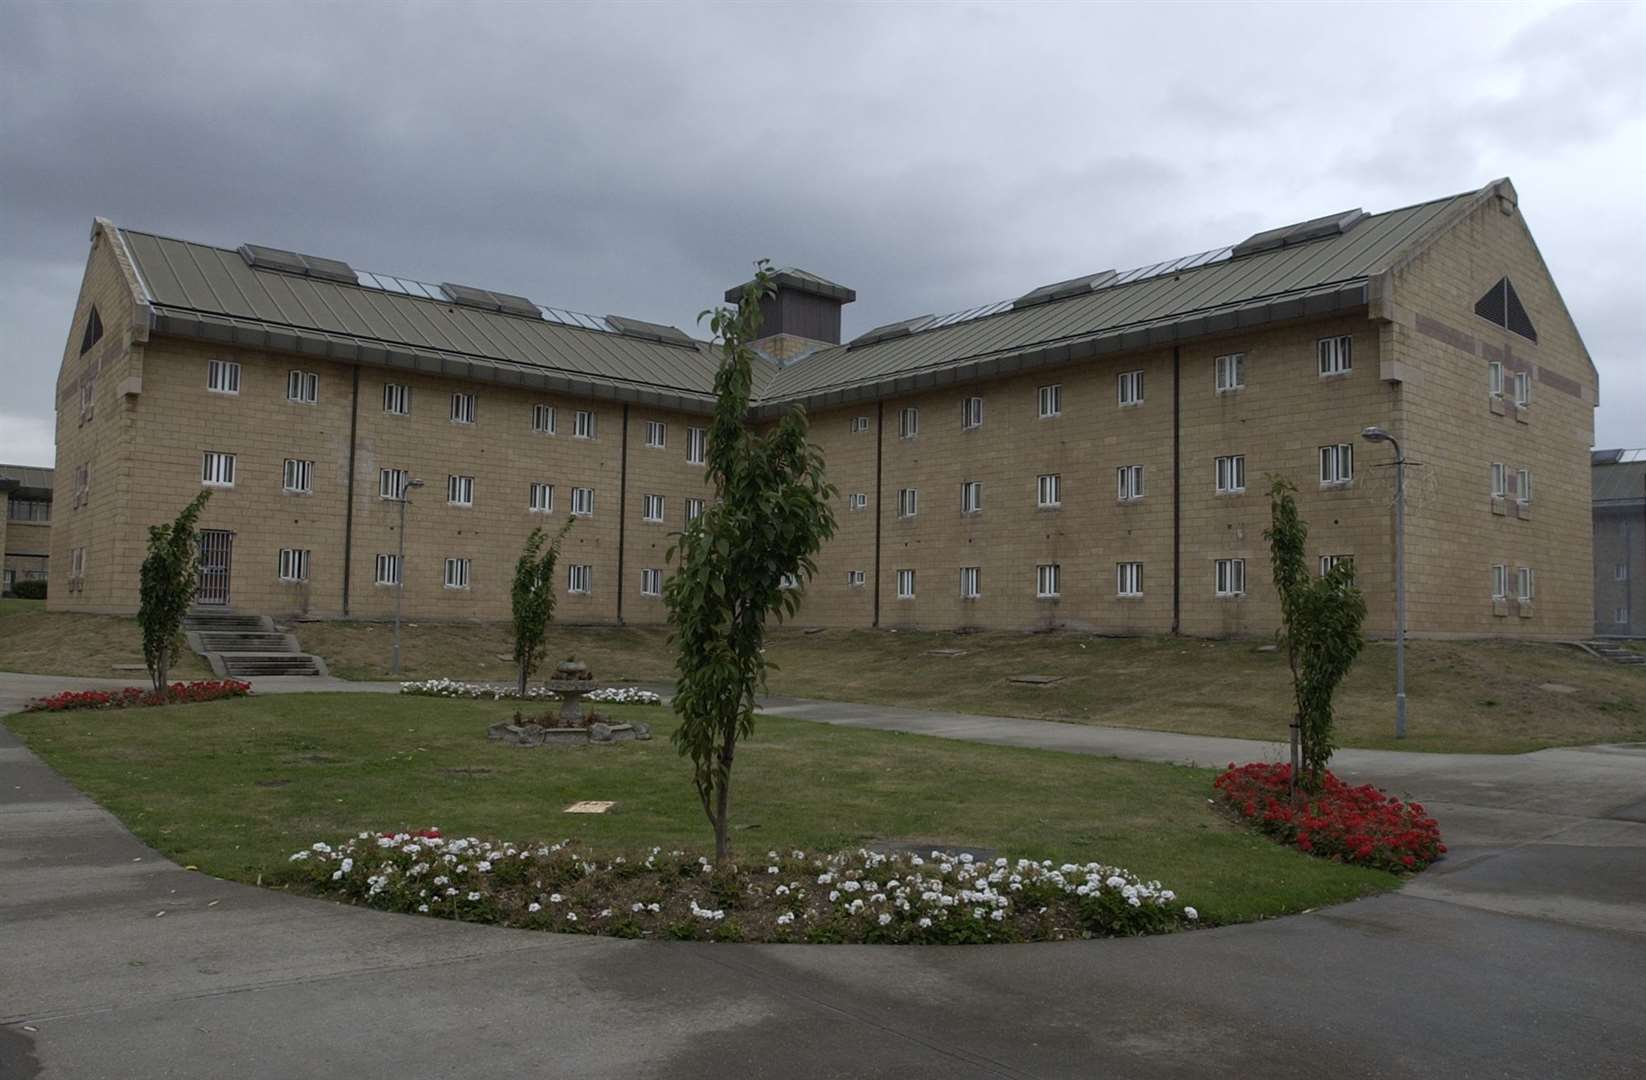 Image of HMP Elmley taken in 2003, for a report on overcrowding